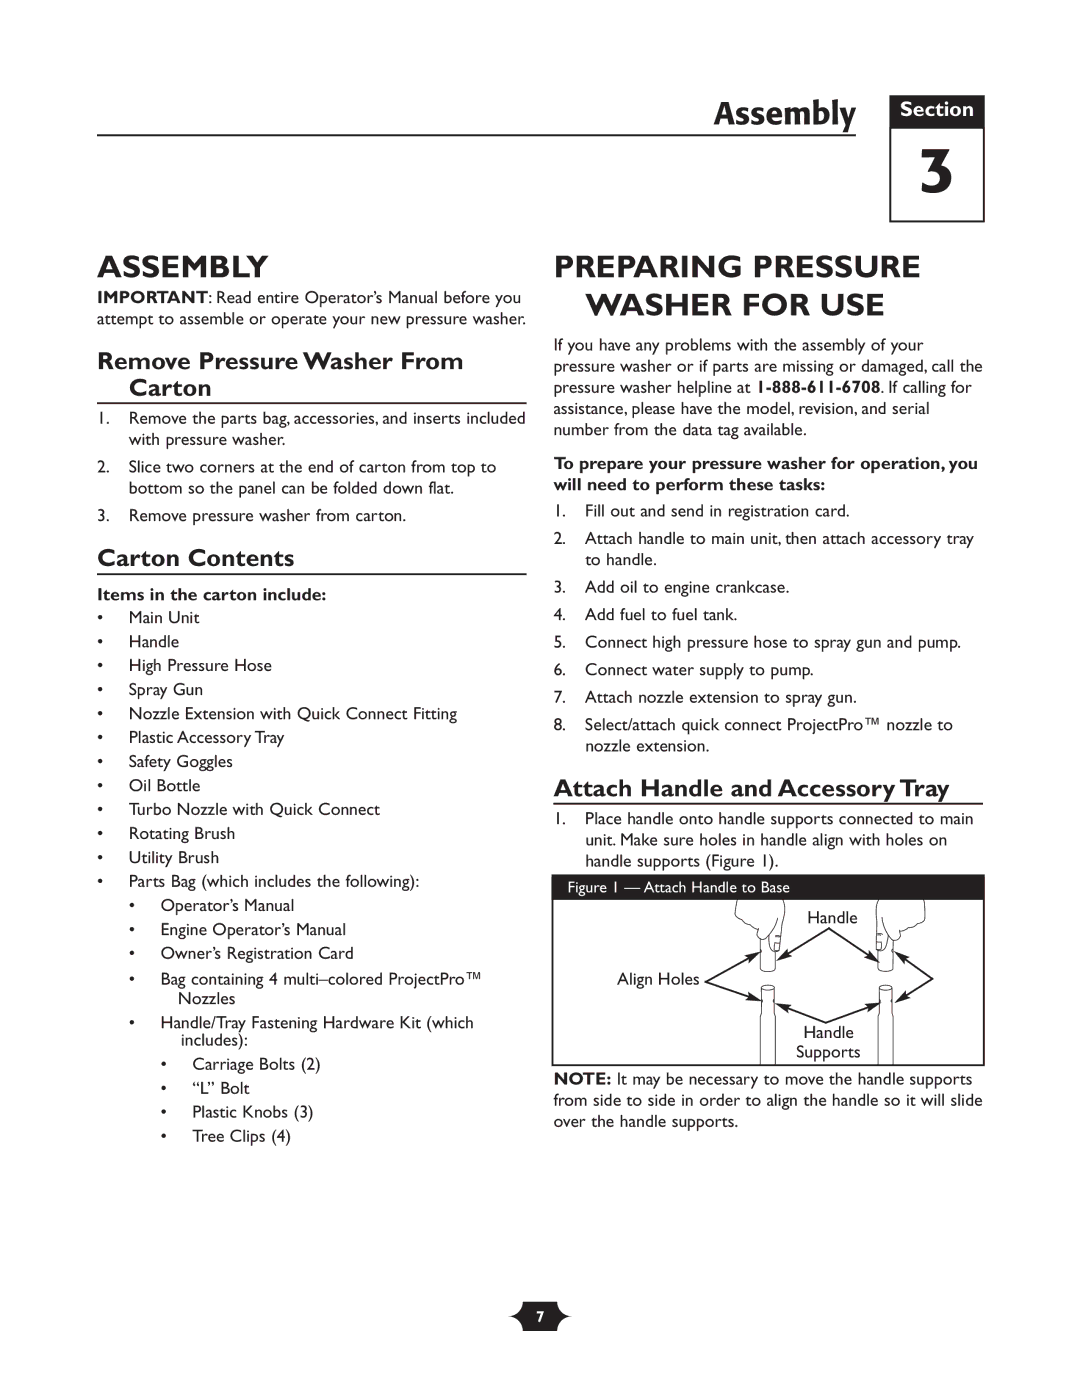 Troy-Bilt 20240 manual Assembly Section, Preparing Pressure Washer for USE 